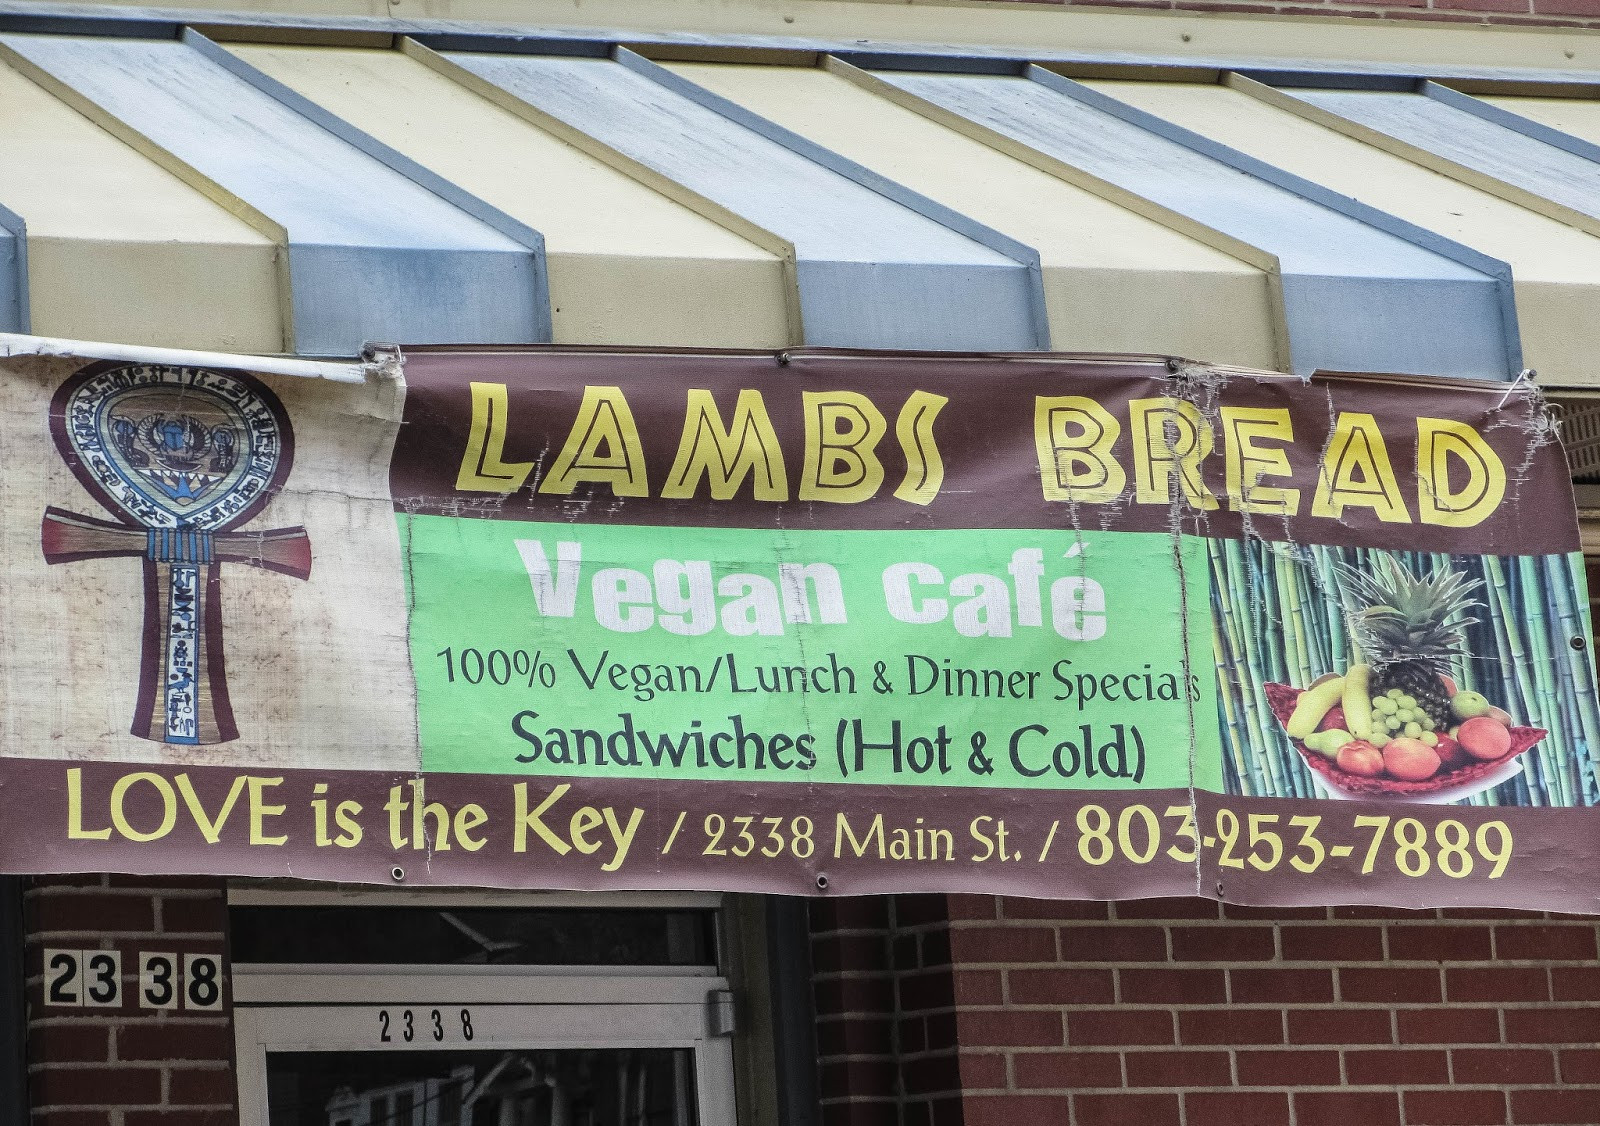 Lambs Bread Vegan Cafe
 Cannundrums Lamb s Bread Vegan Cafe Columbia South